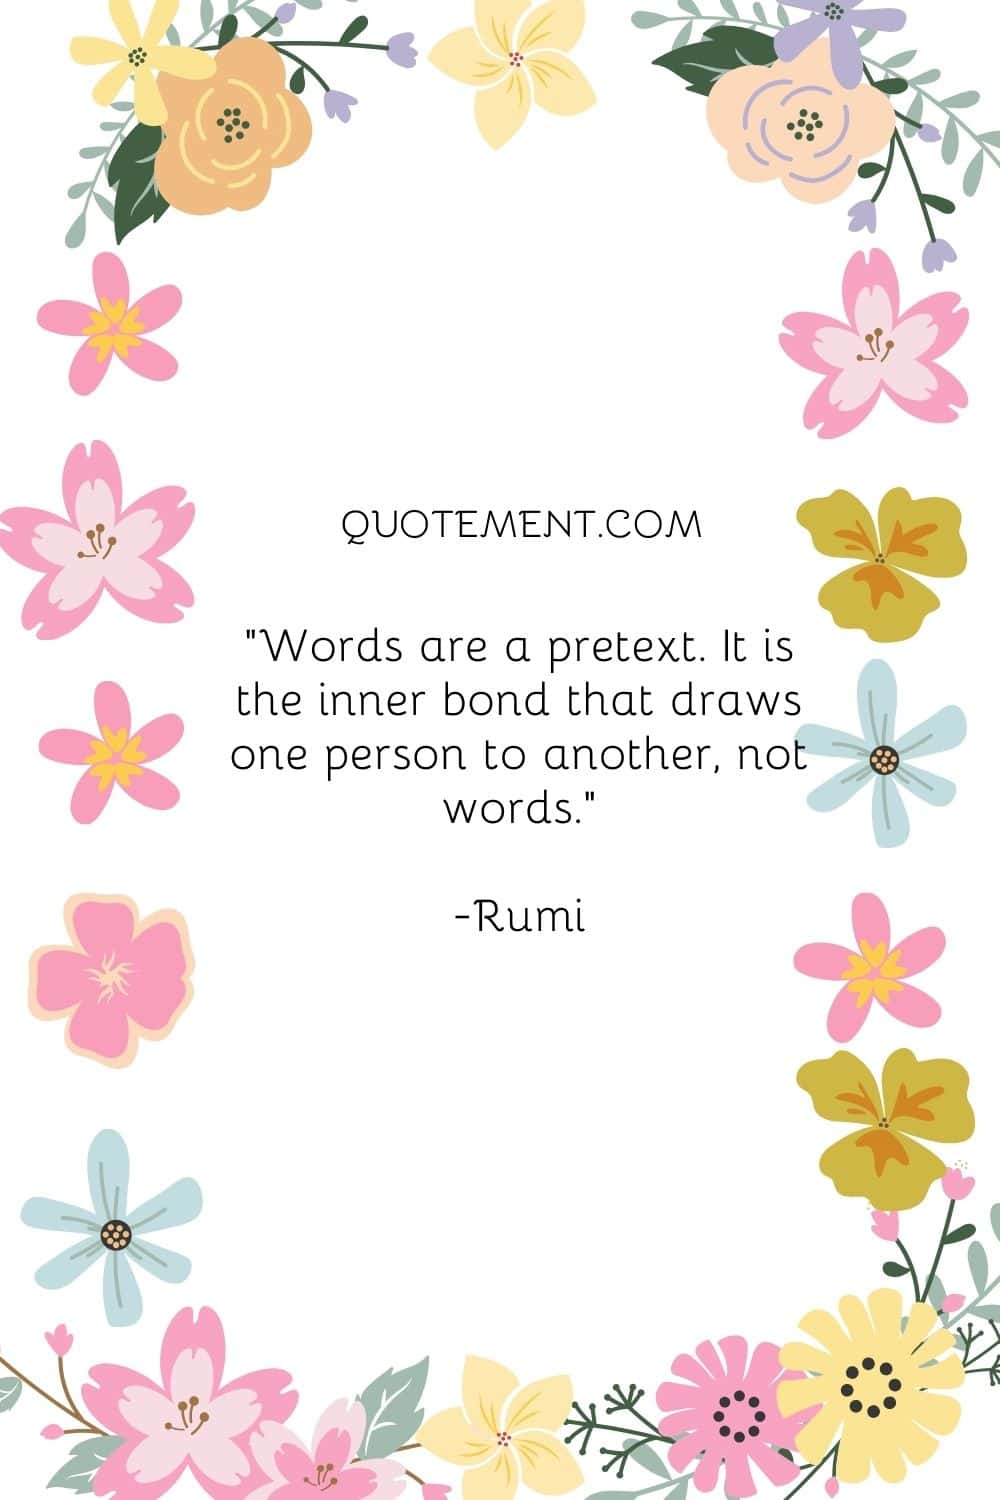 Words are a pretext. It is the inner bond that draws one person to another, not words.